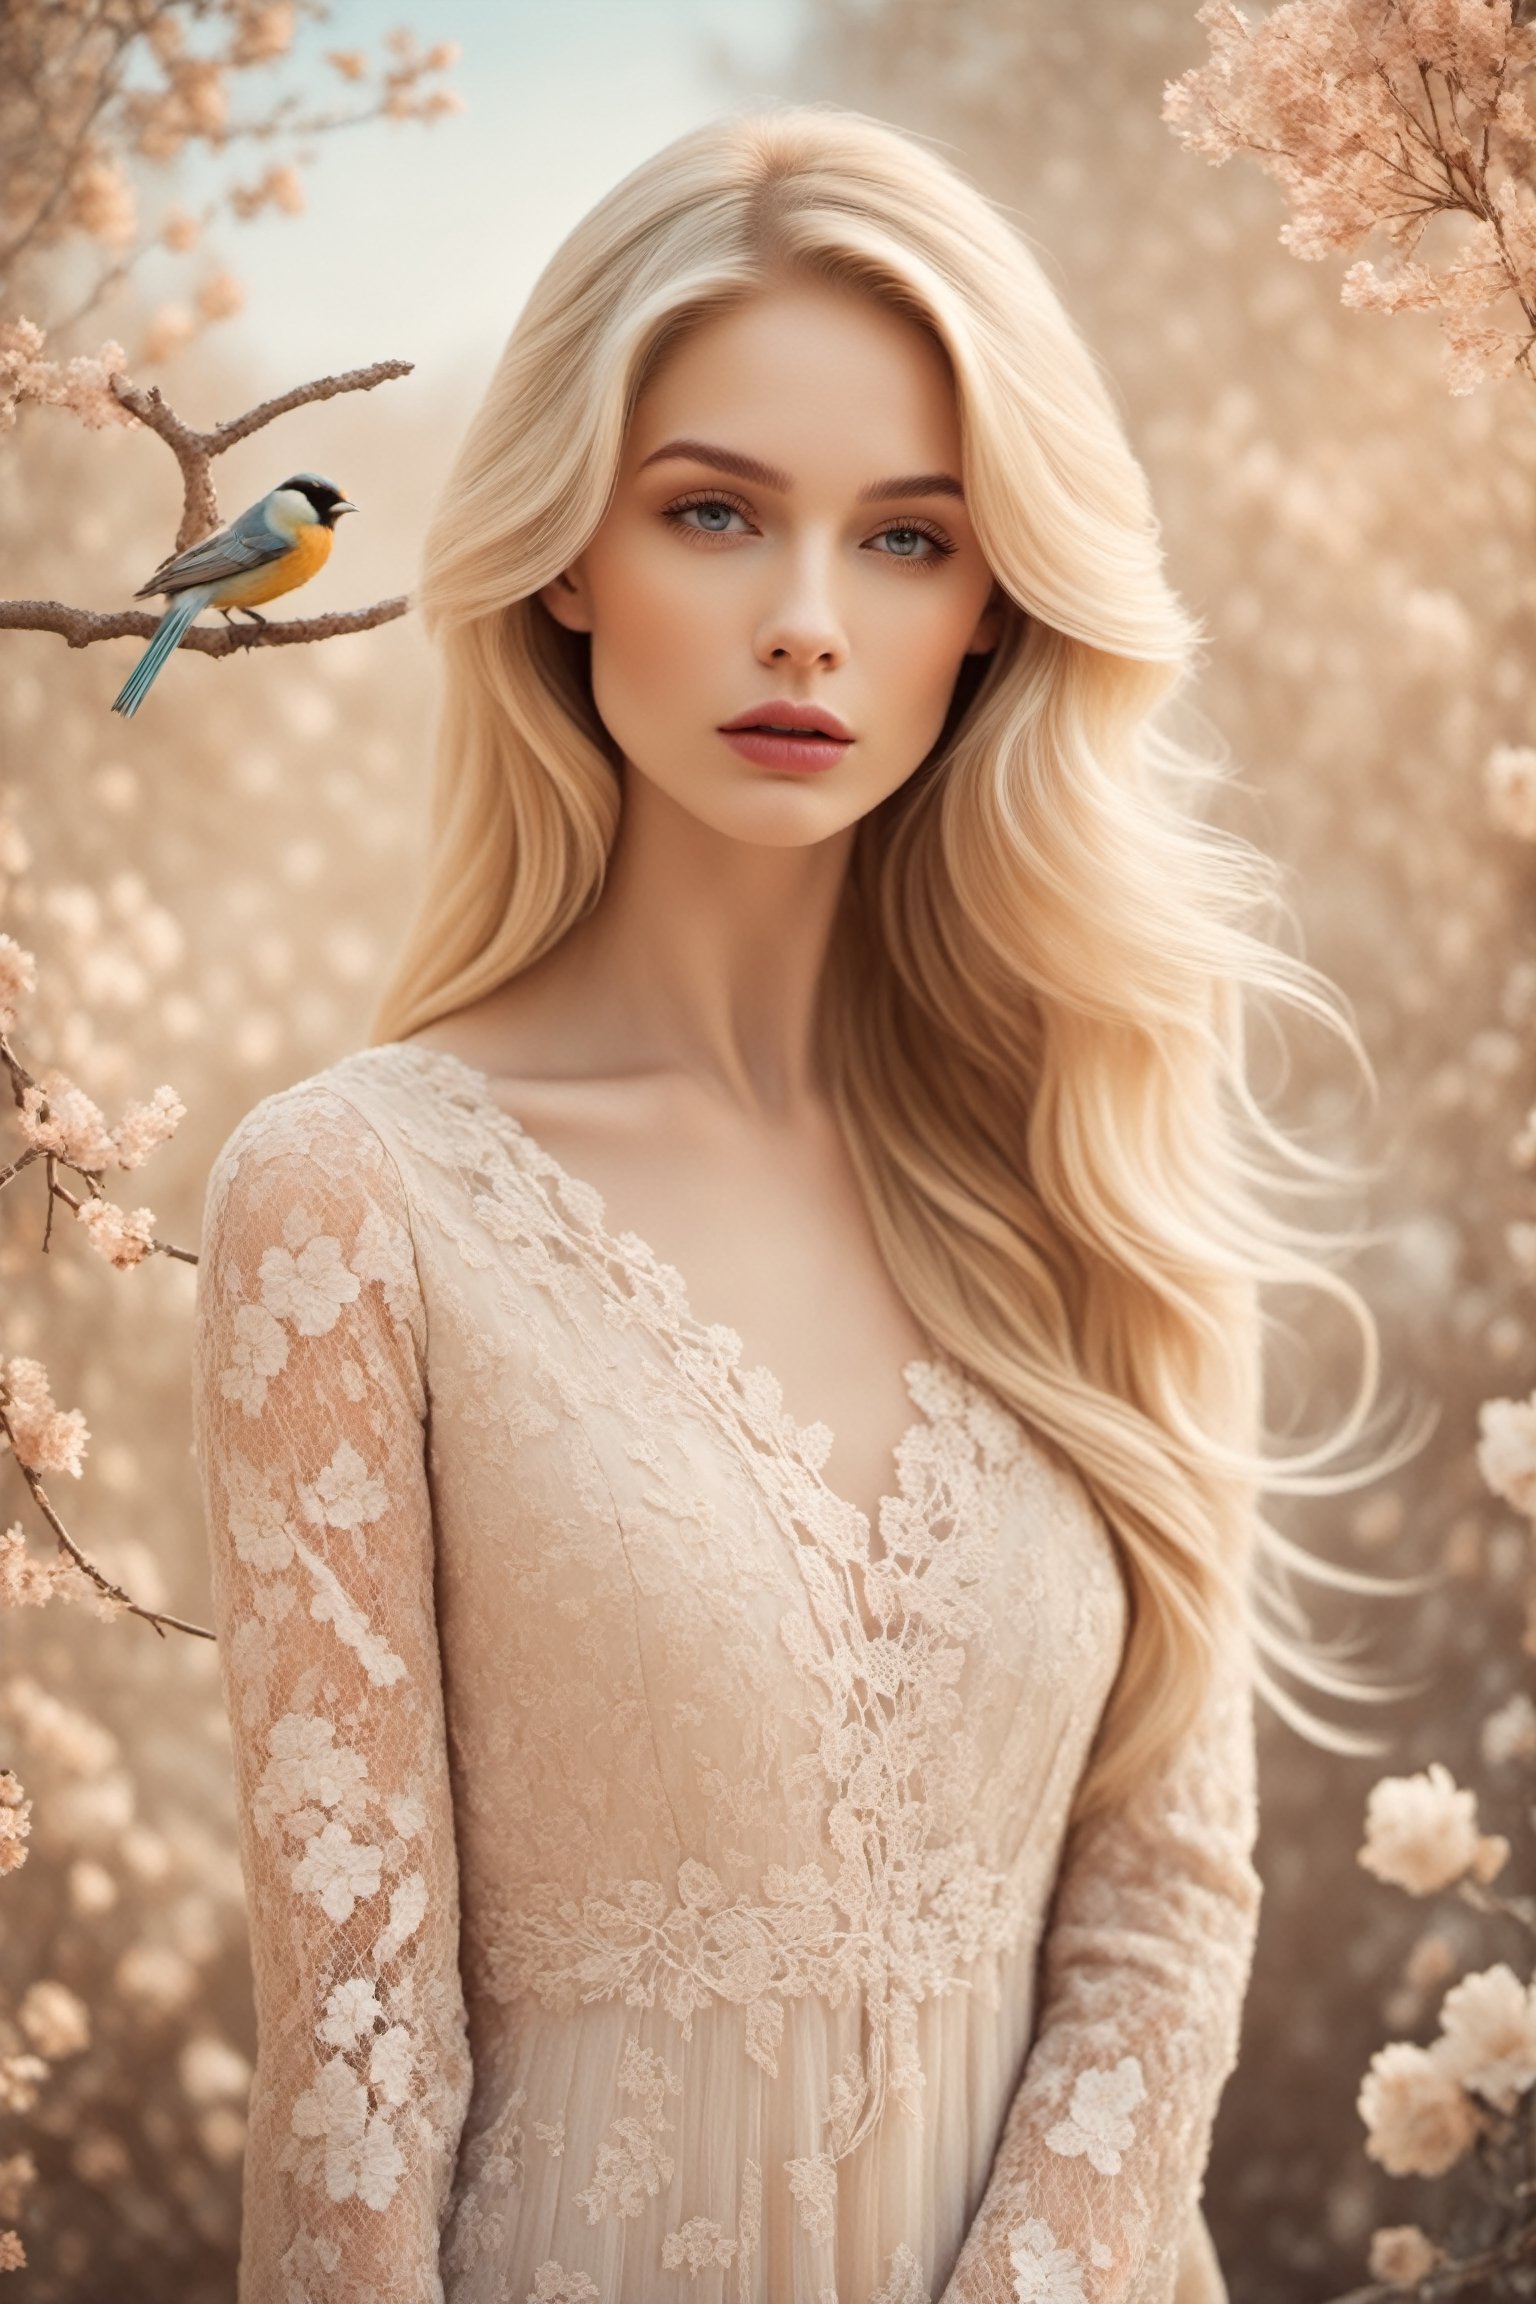 a beautiful young woman, long blonde hair, pale soft skin,lace dress, soft colors, background with birds and flowers, intricate details,